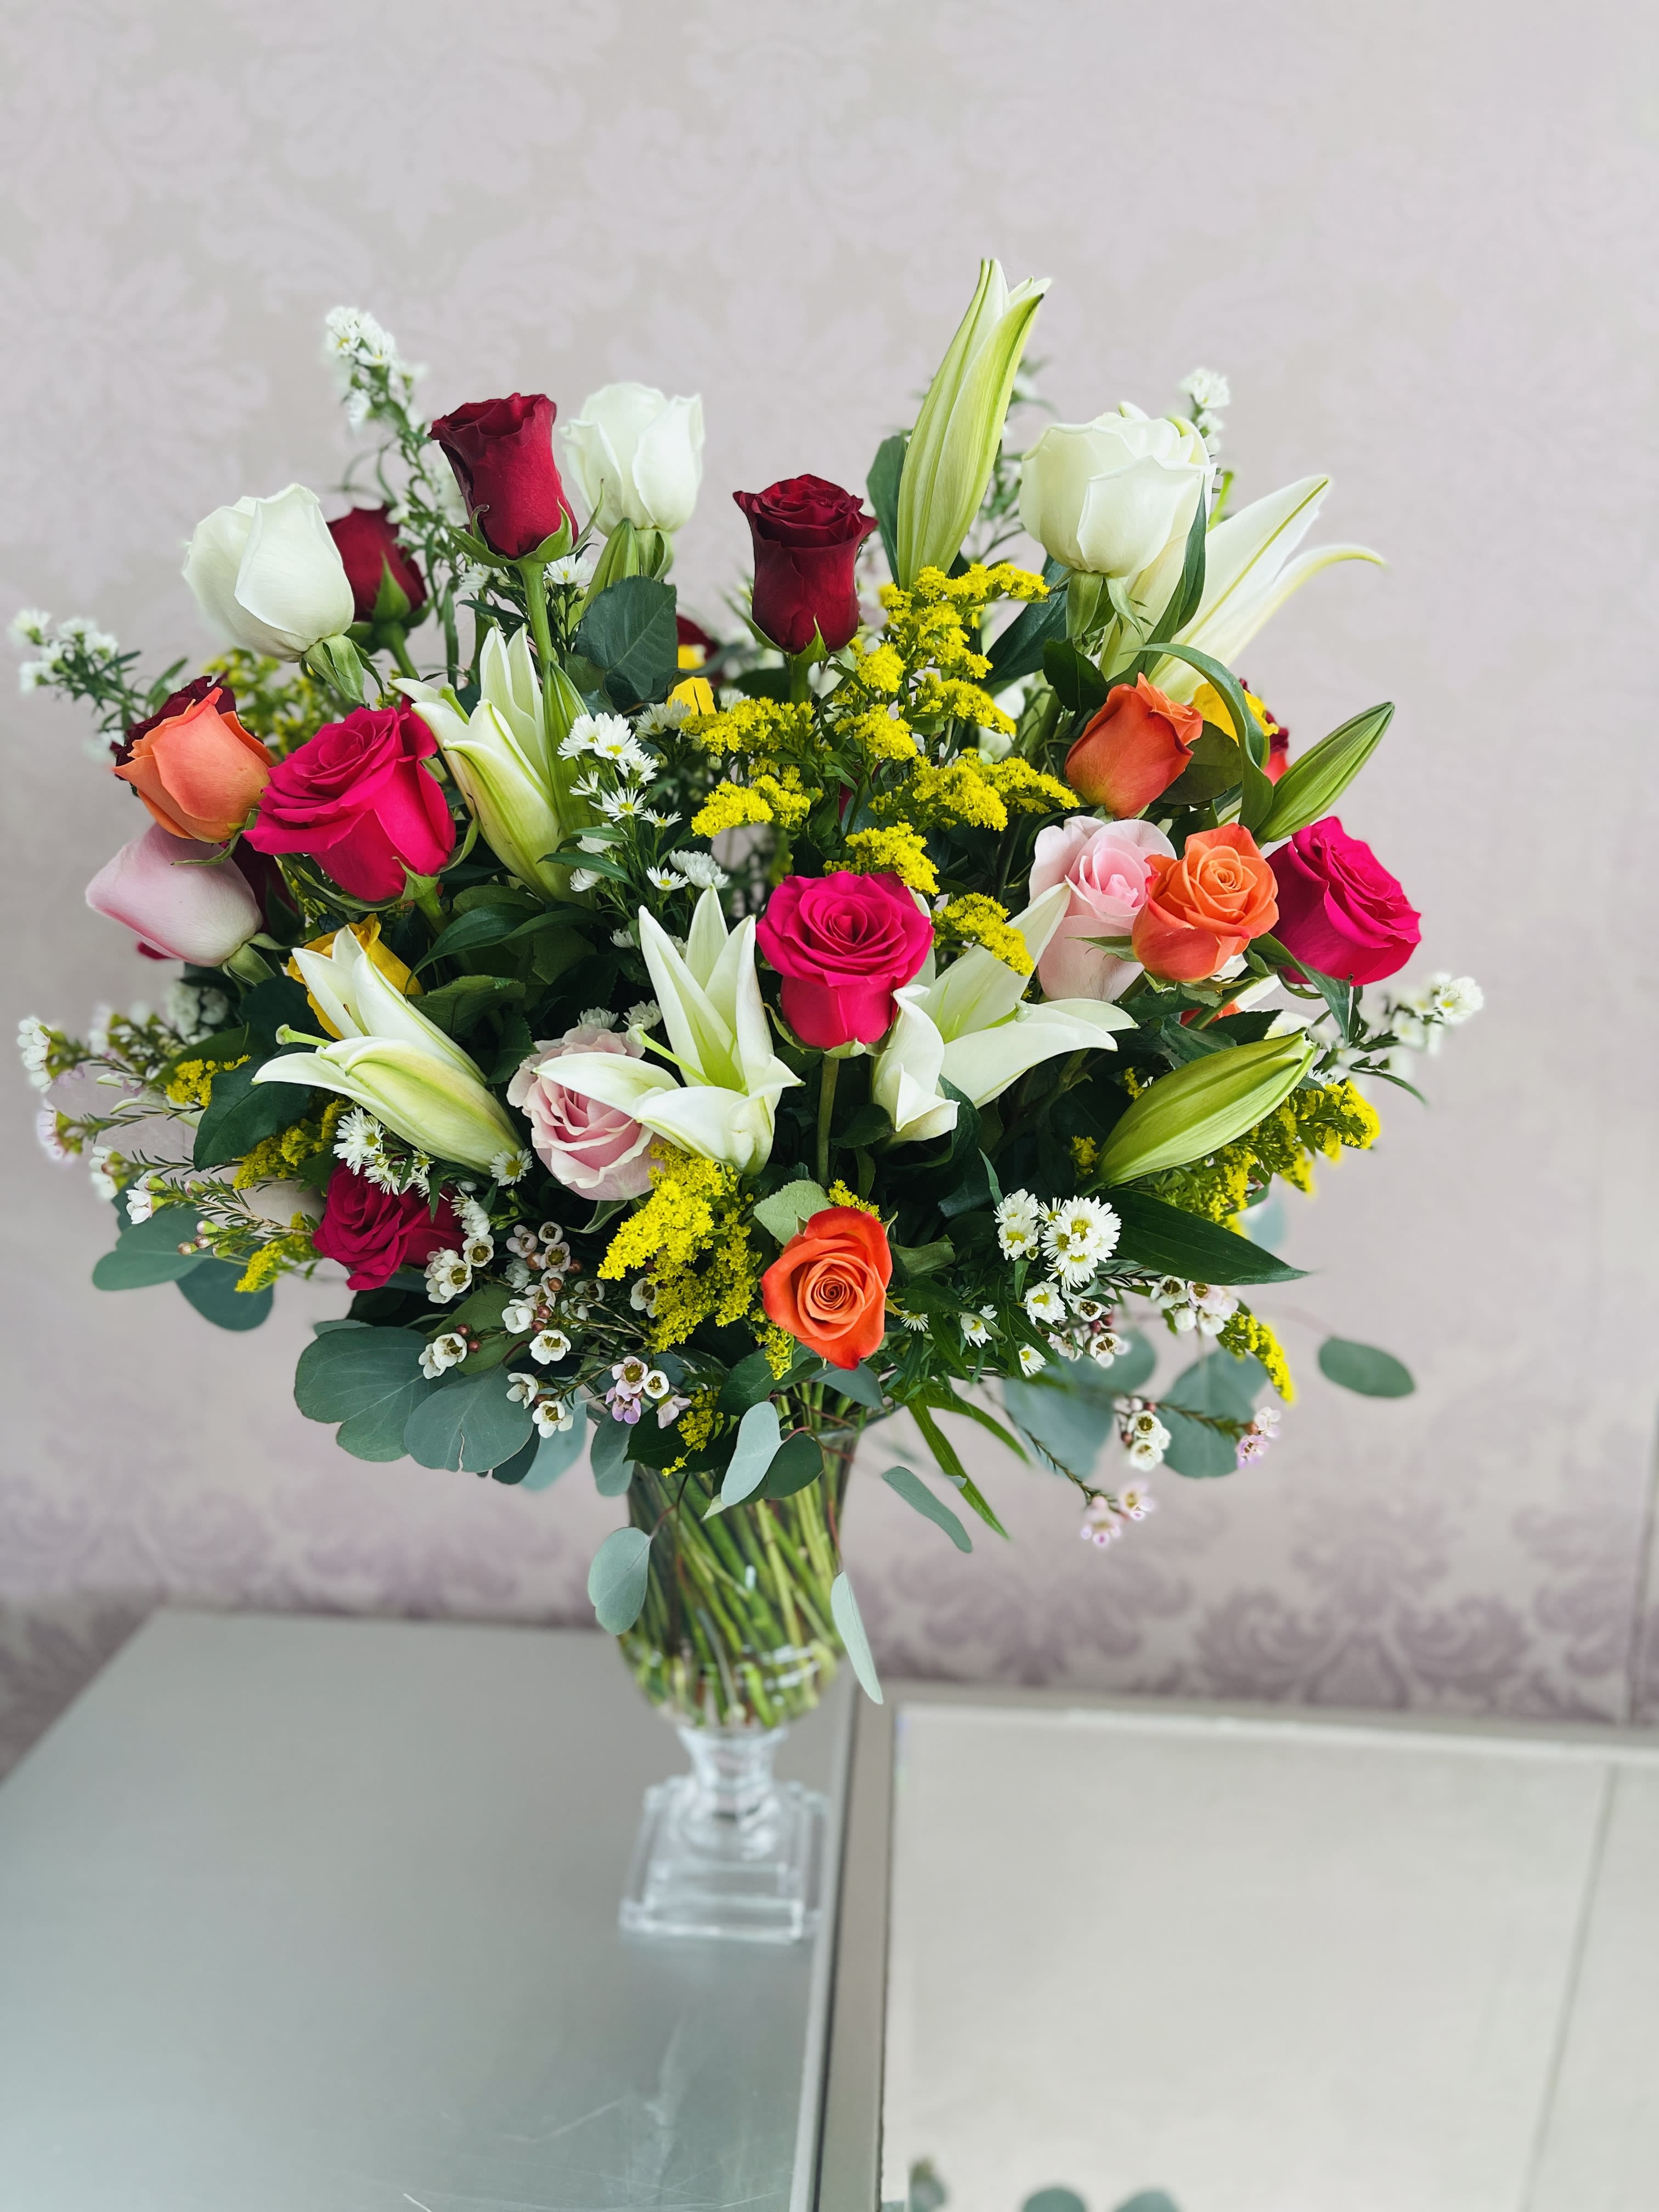 Rainbow Bouquet  - This colorful bouquet includes white lilies, roses , white aster , yelllow aster ,silver dollar eucalyptus, seeded eucalyptus, and lemon leaf. Delivered in a clear urn vase 